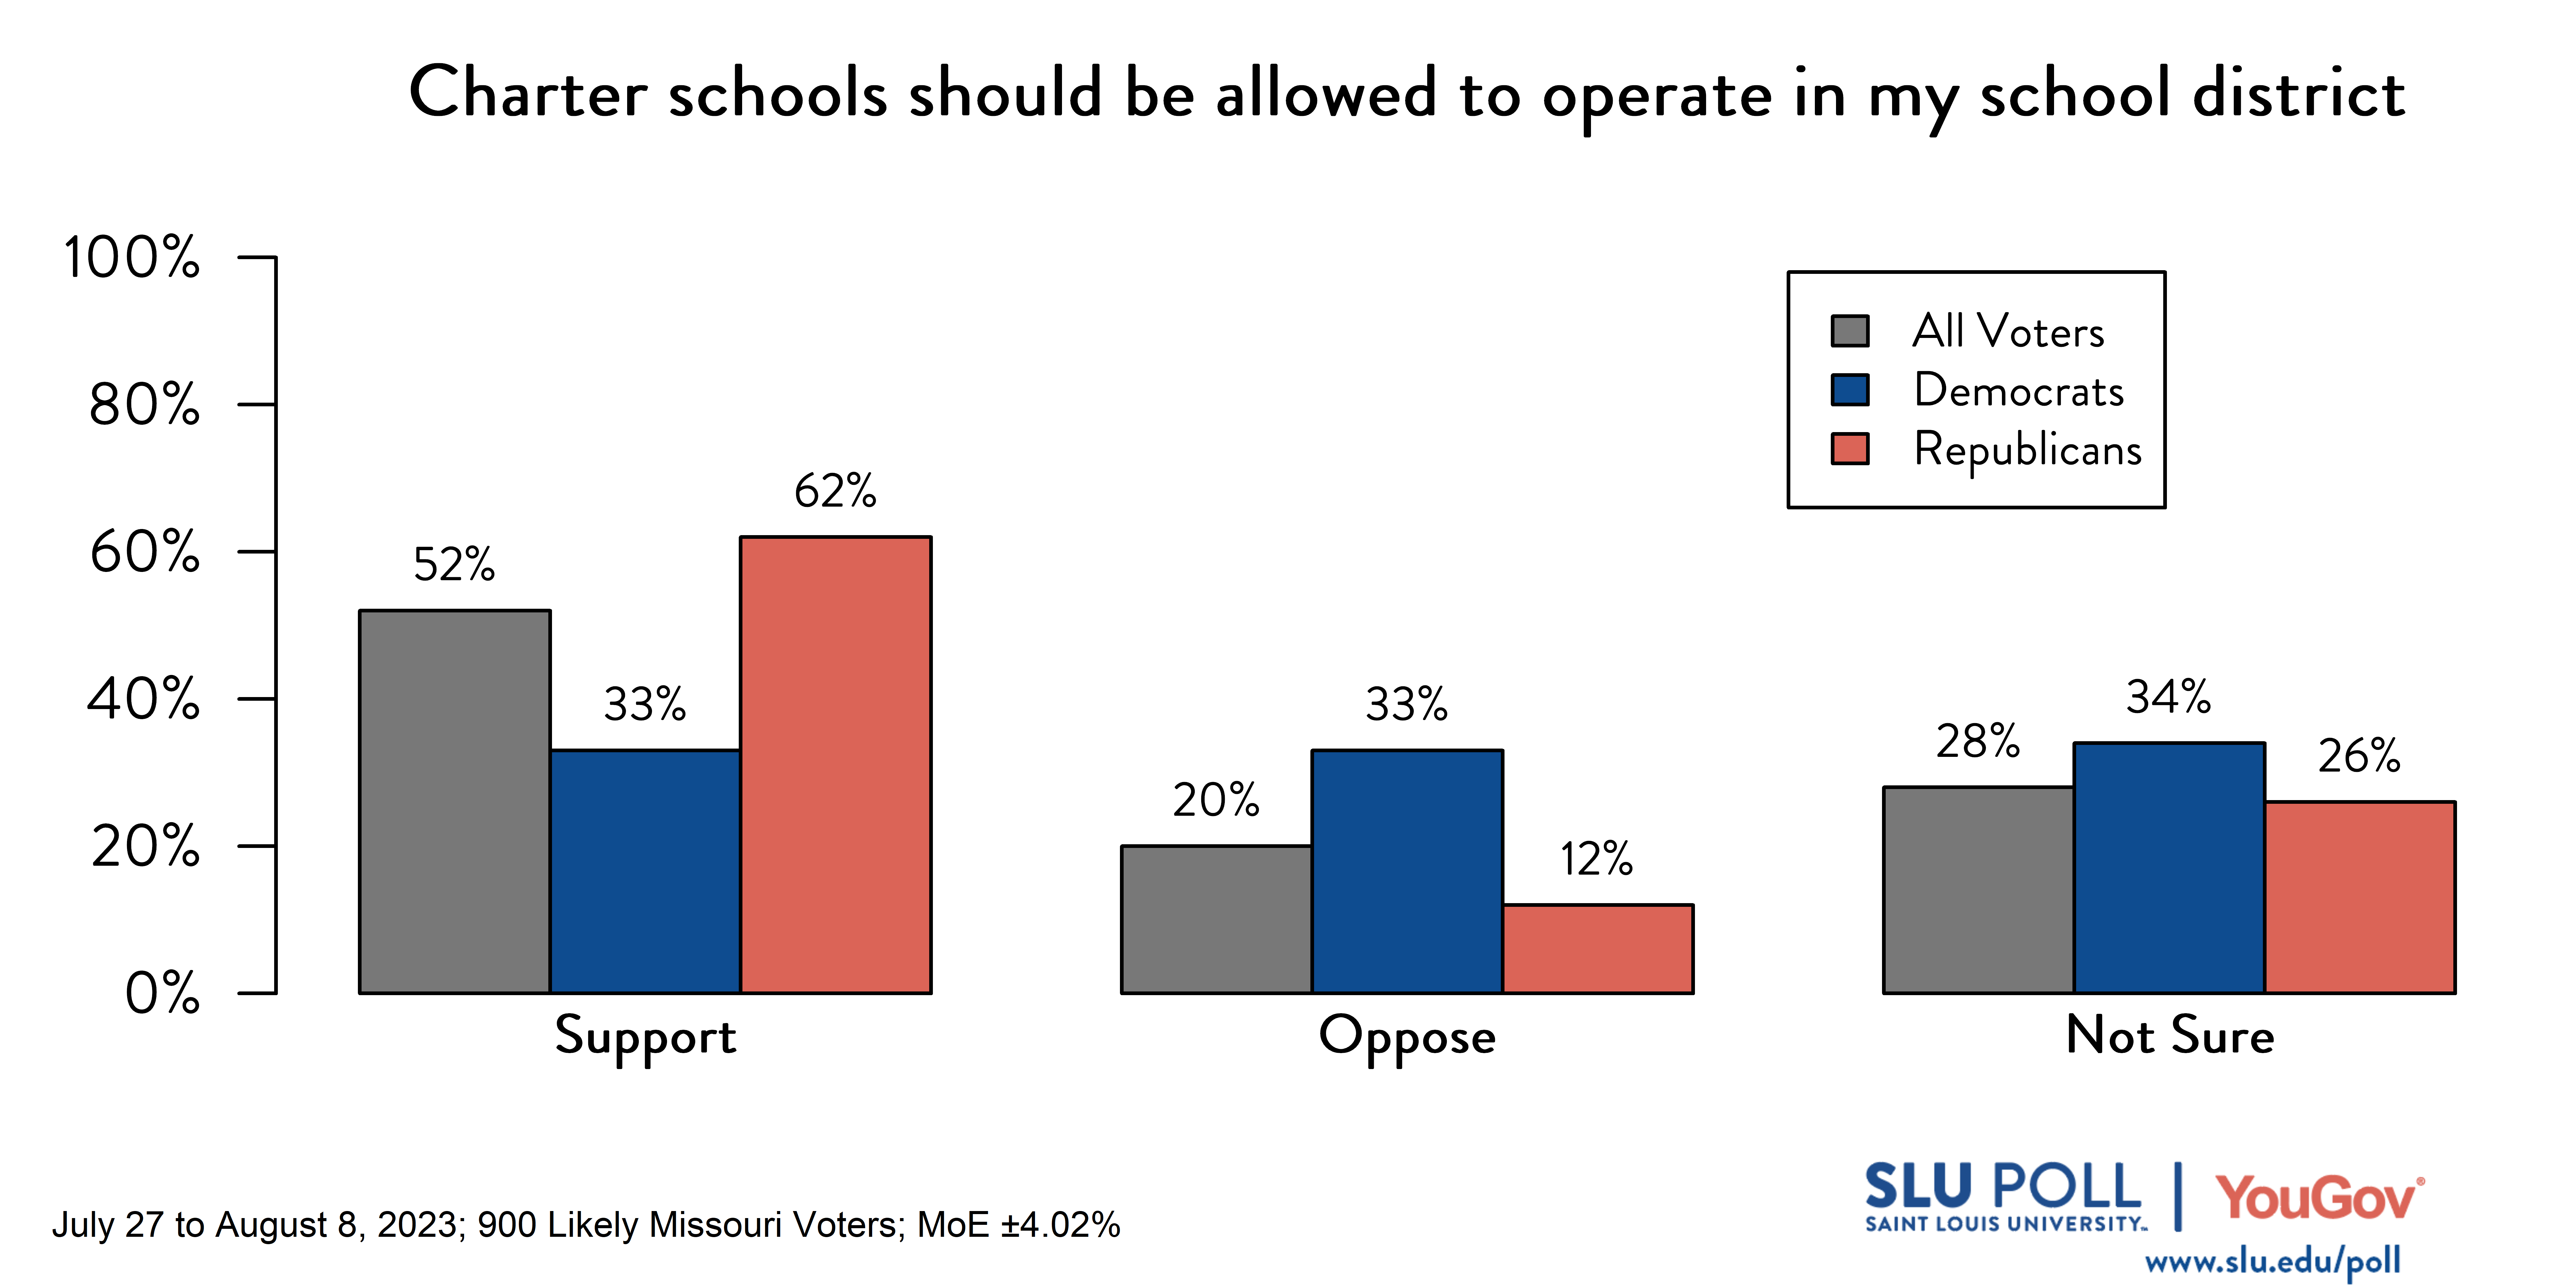 Likely voters' responses to 'Do you support or oppose the following policies: Charter schools should be allowed to operate in my school district.': 52% Support, 20% Oppose, and 28% Not Sure. Democratic voters' responses: ' 33% Support, 33% Oppose, and 34% Not Sure. Republican voters' responses: 62% Support, 12% Oppose, and 26% Not Sure.